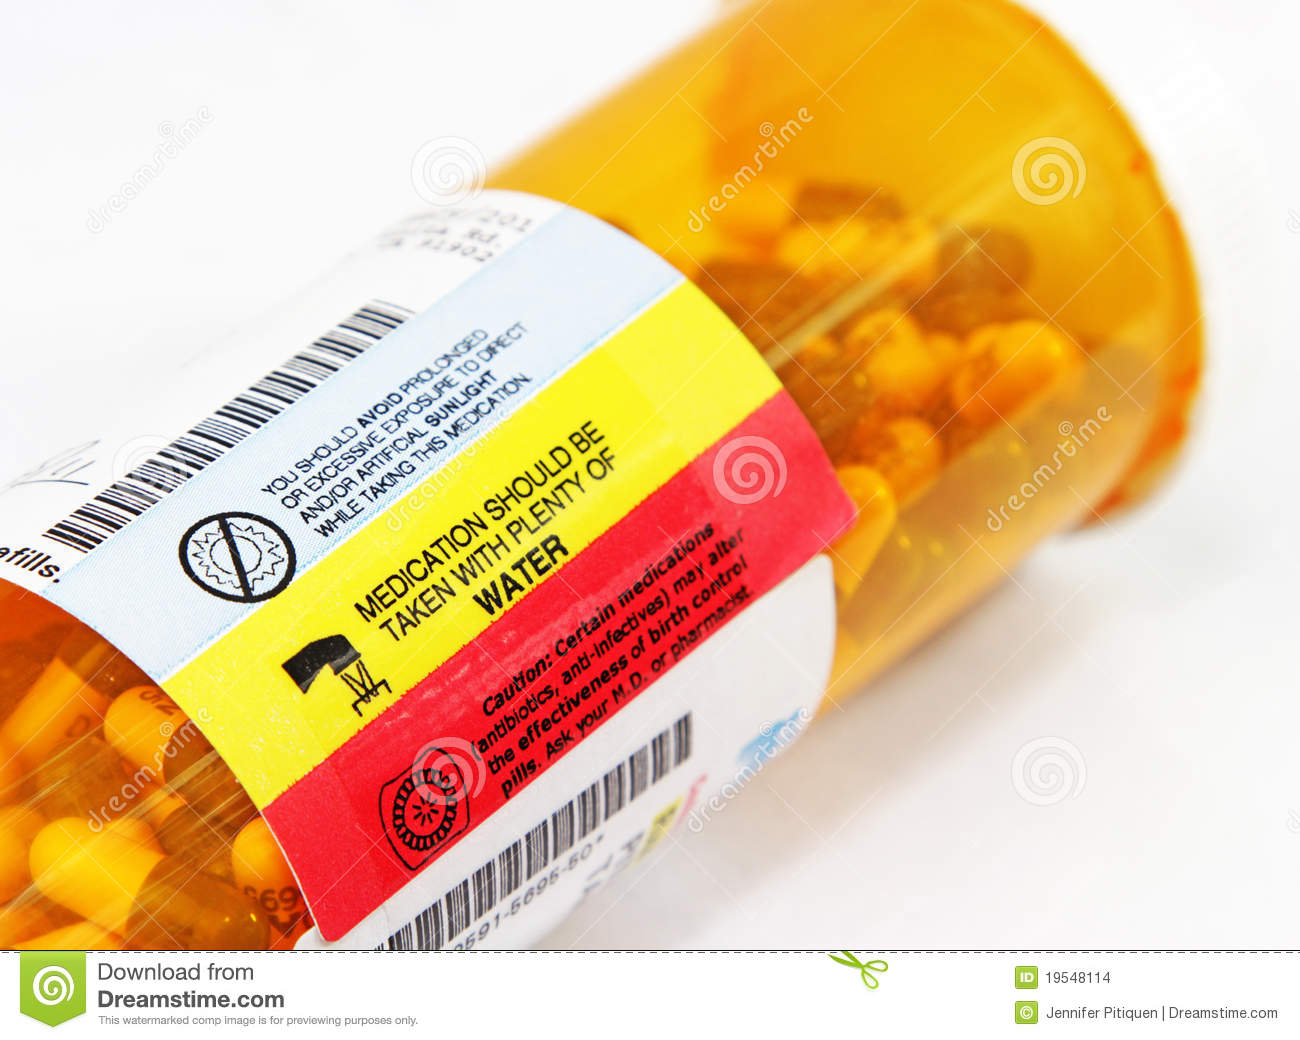 Warning Stickers On A Rx Or Prescription Drug Container On How To Take    